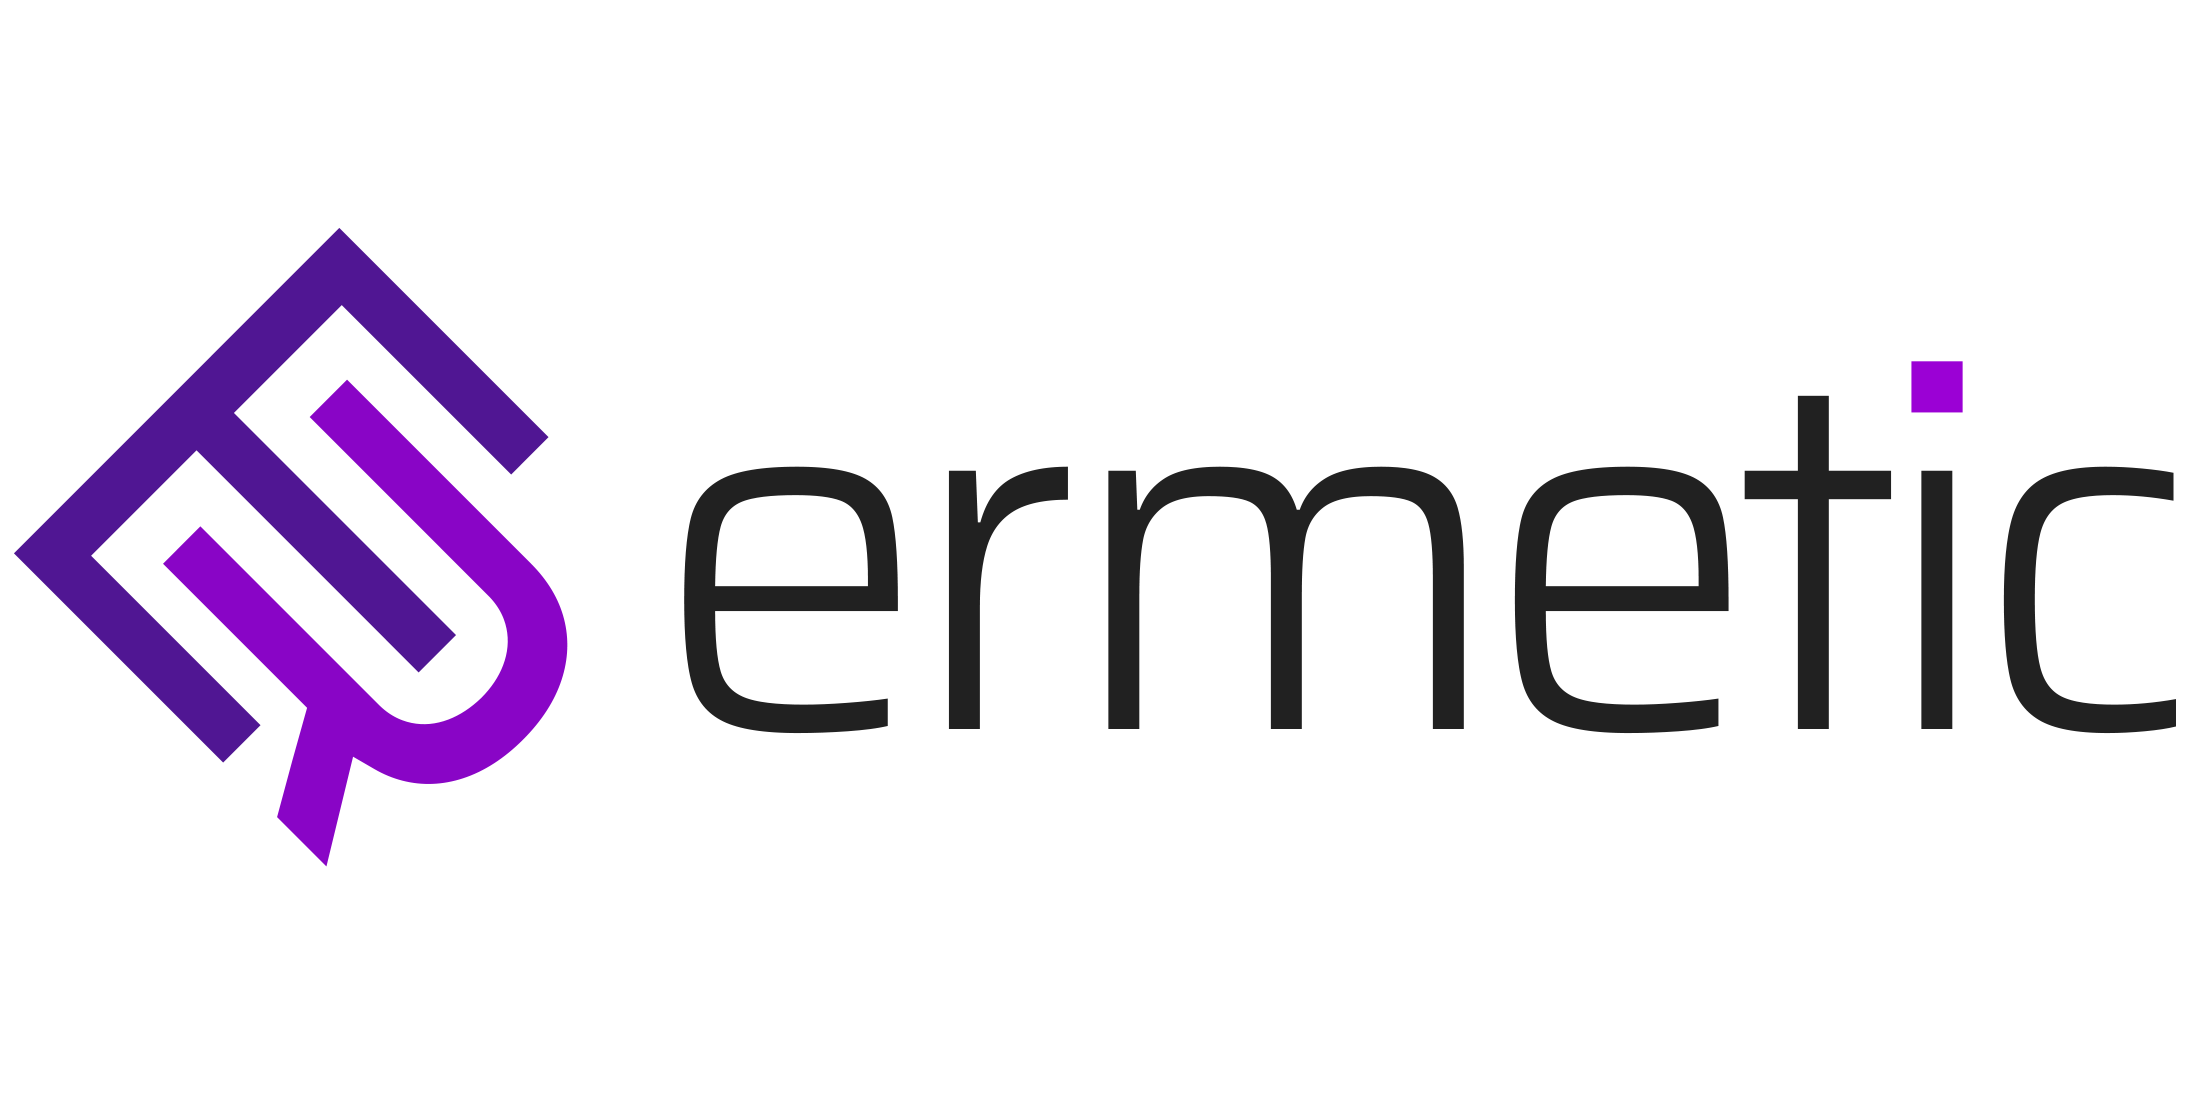 Updated_Ermetic_logo.png